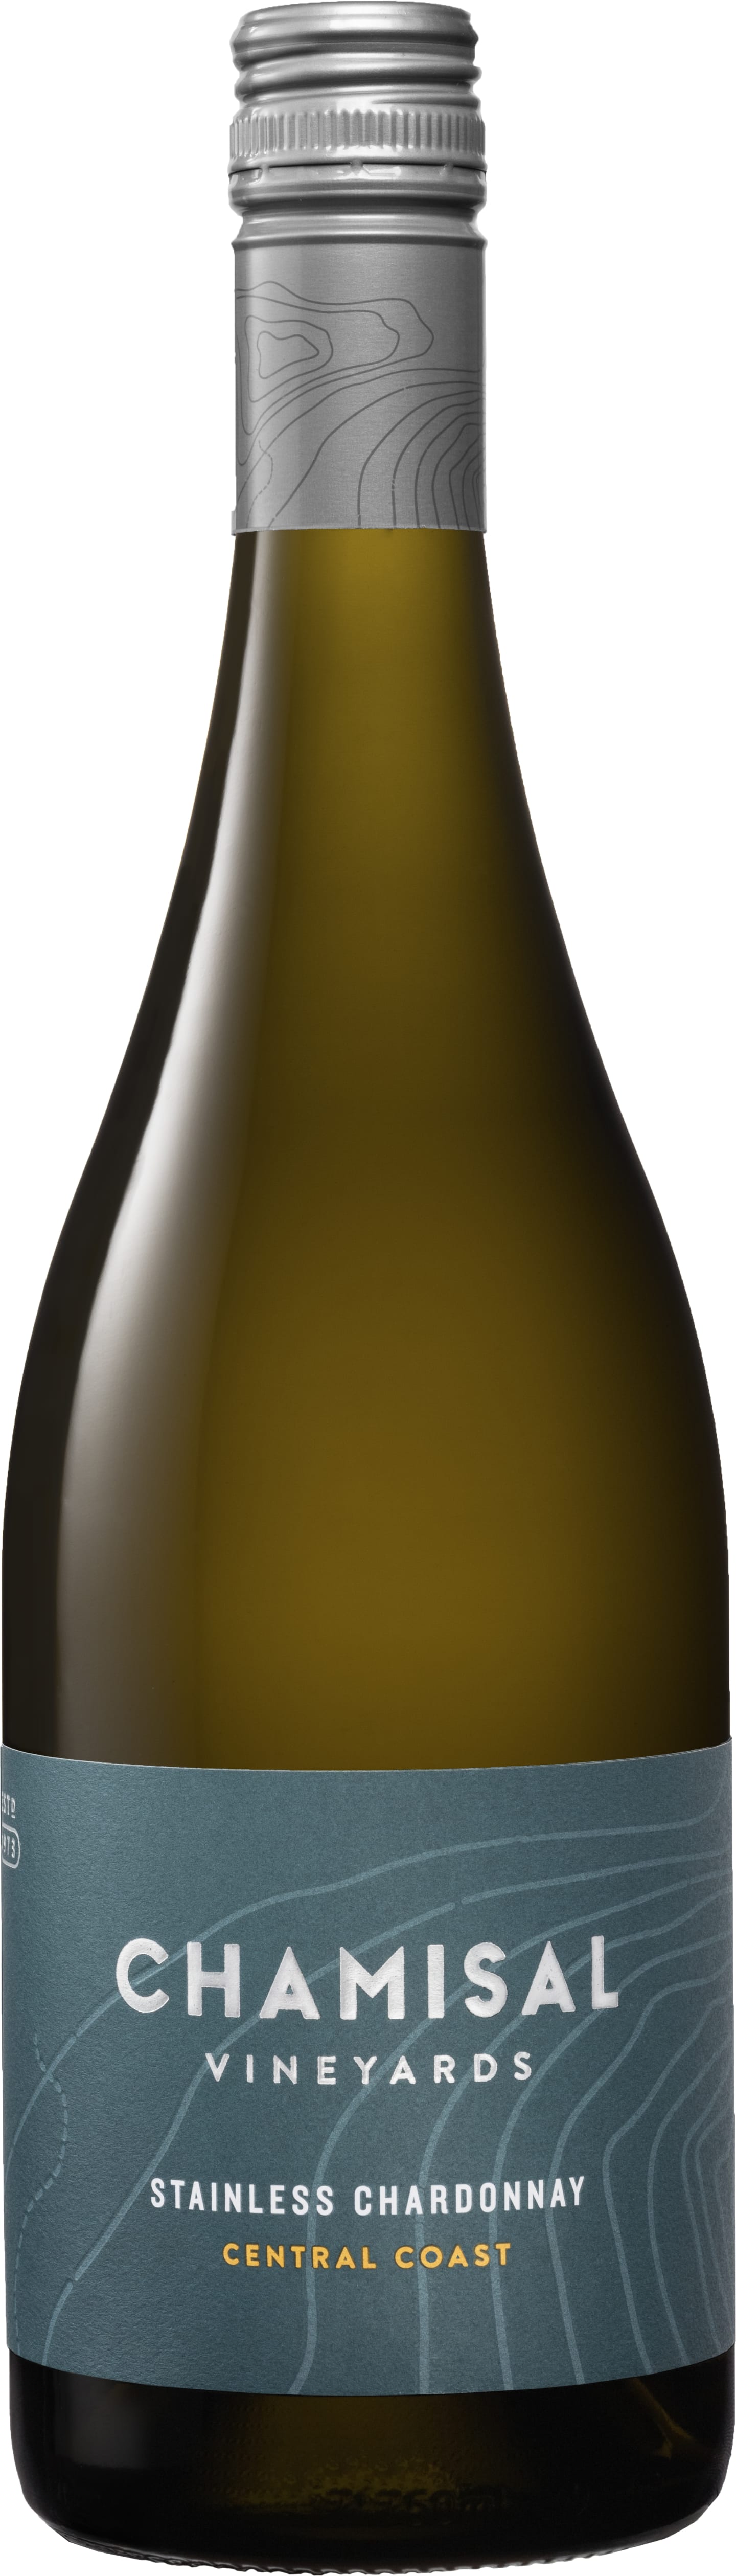 Chamisal Vineyards Chardonnay Unoaked Stainless 2017